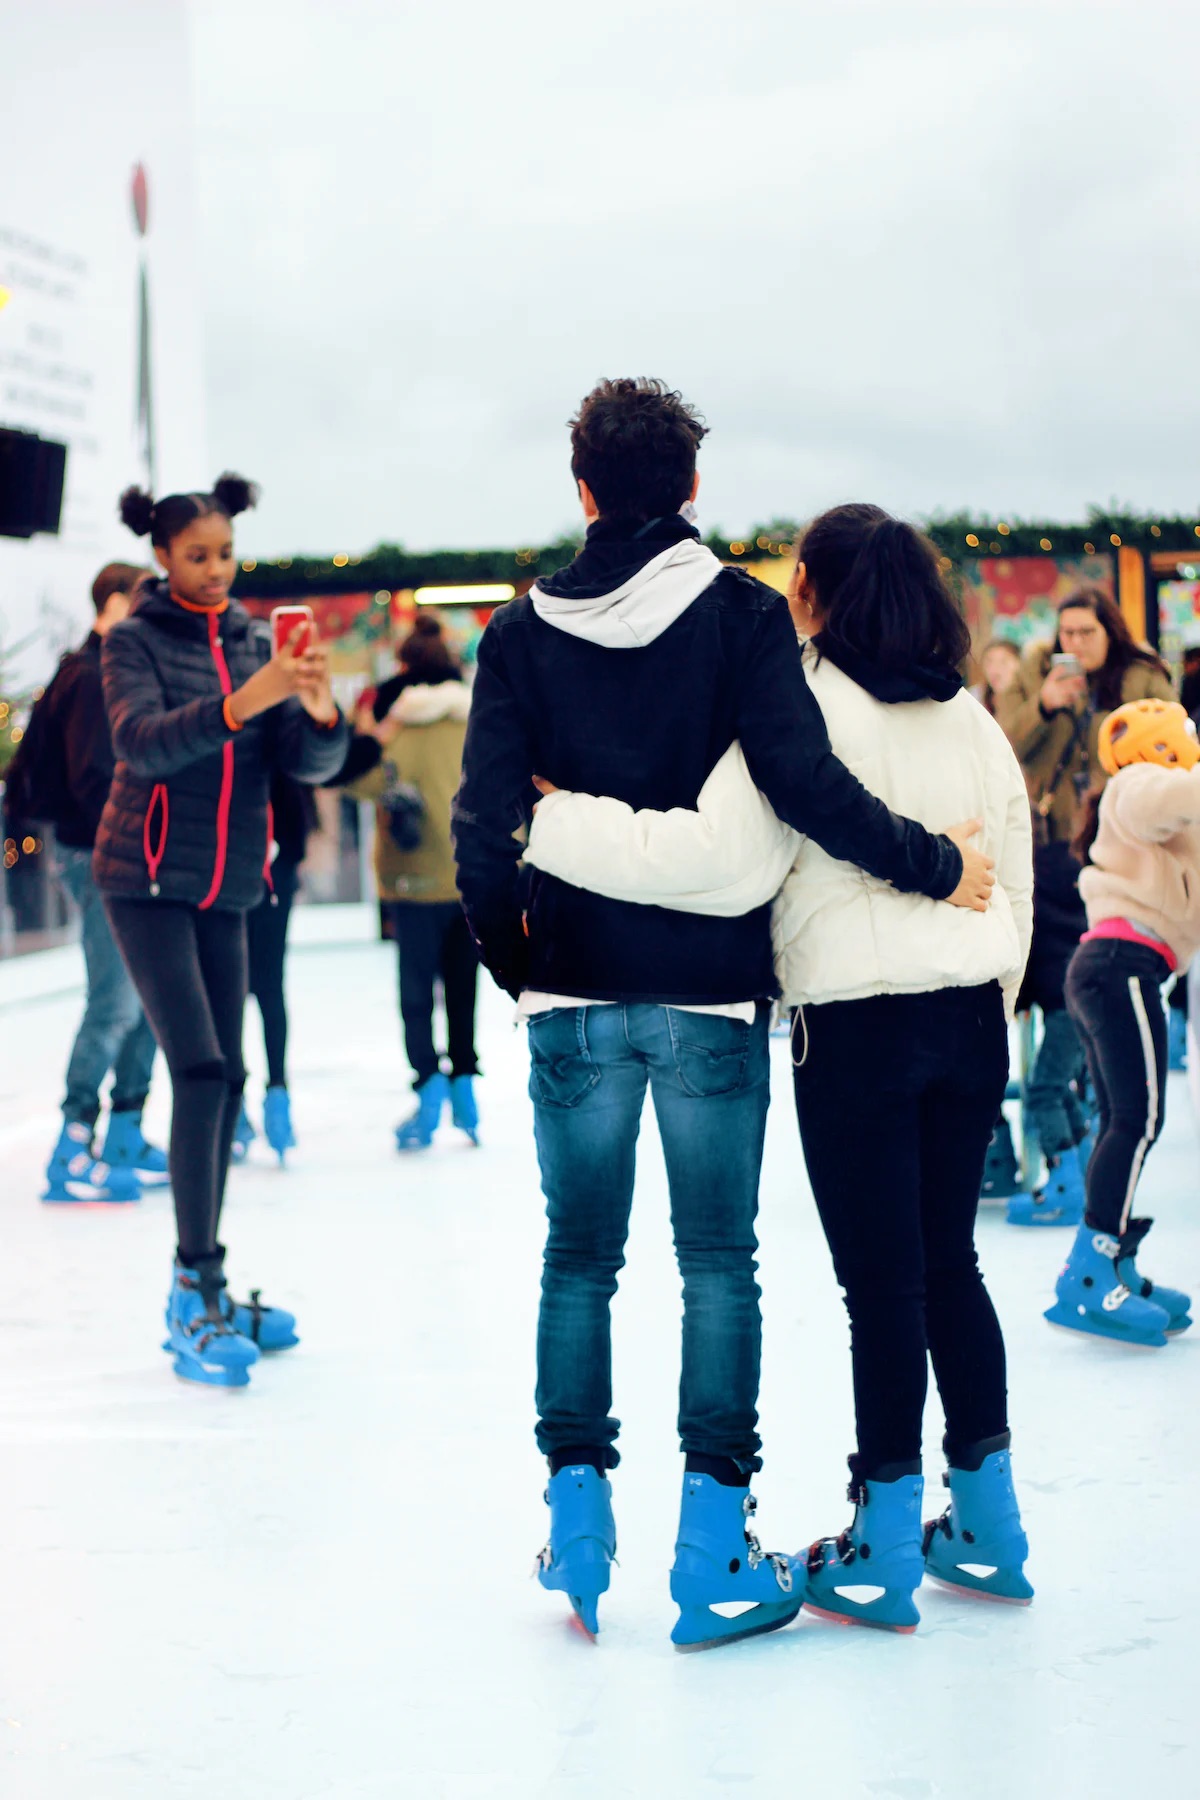 Today is your last chance to go ice skating in Santa Monica, and from first-time skaters to experts, all are welcome.